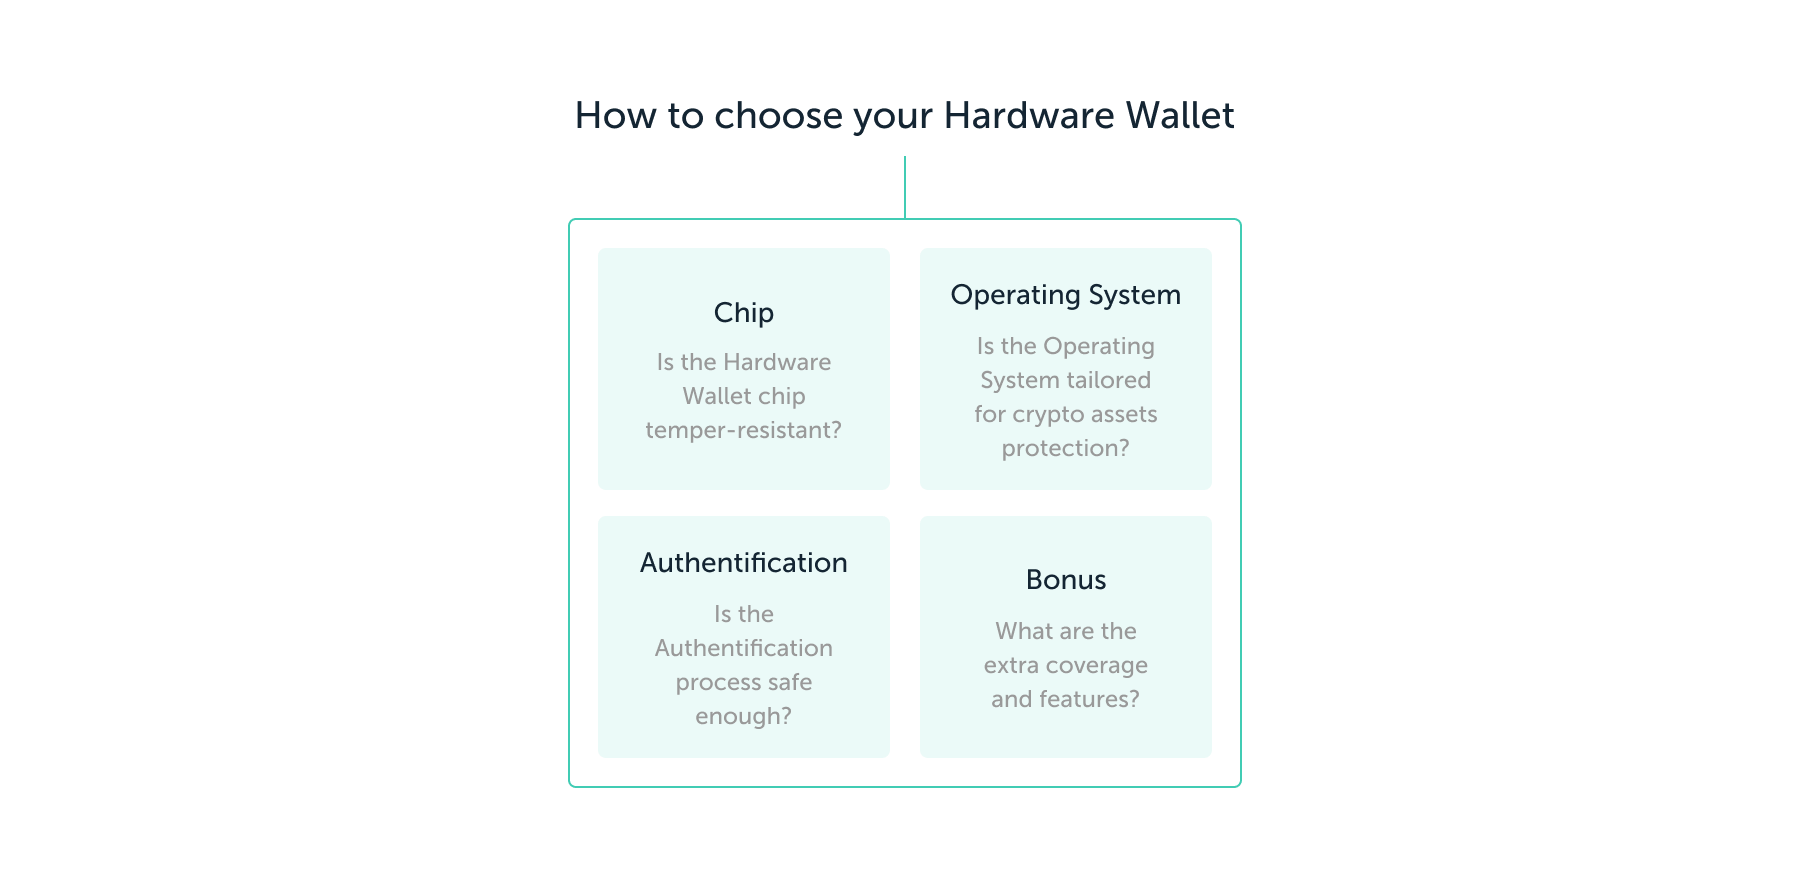 How to choose your Hardware Wallet